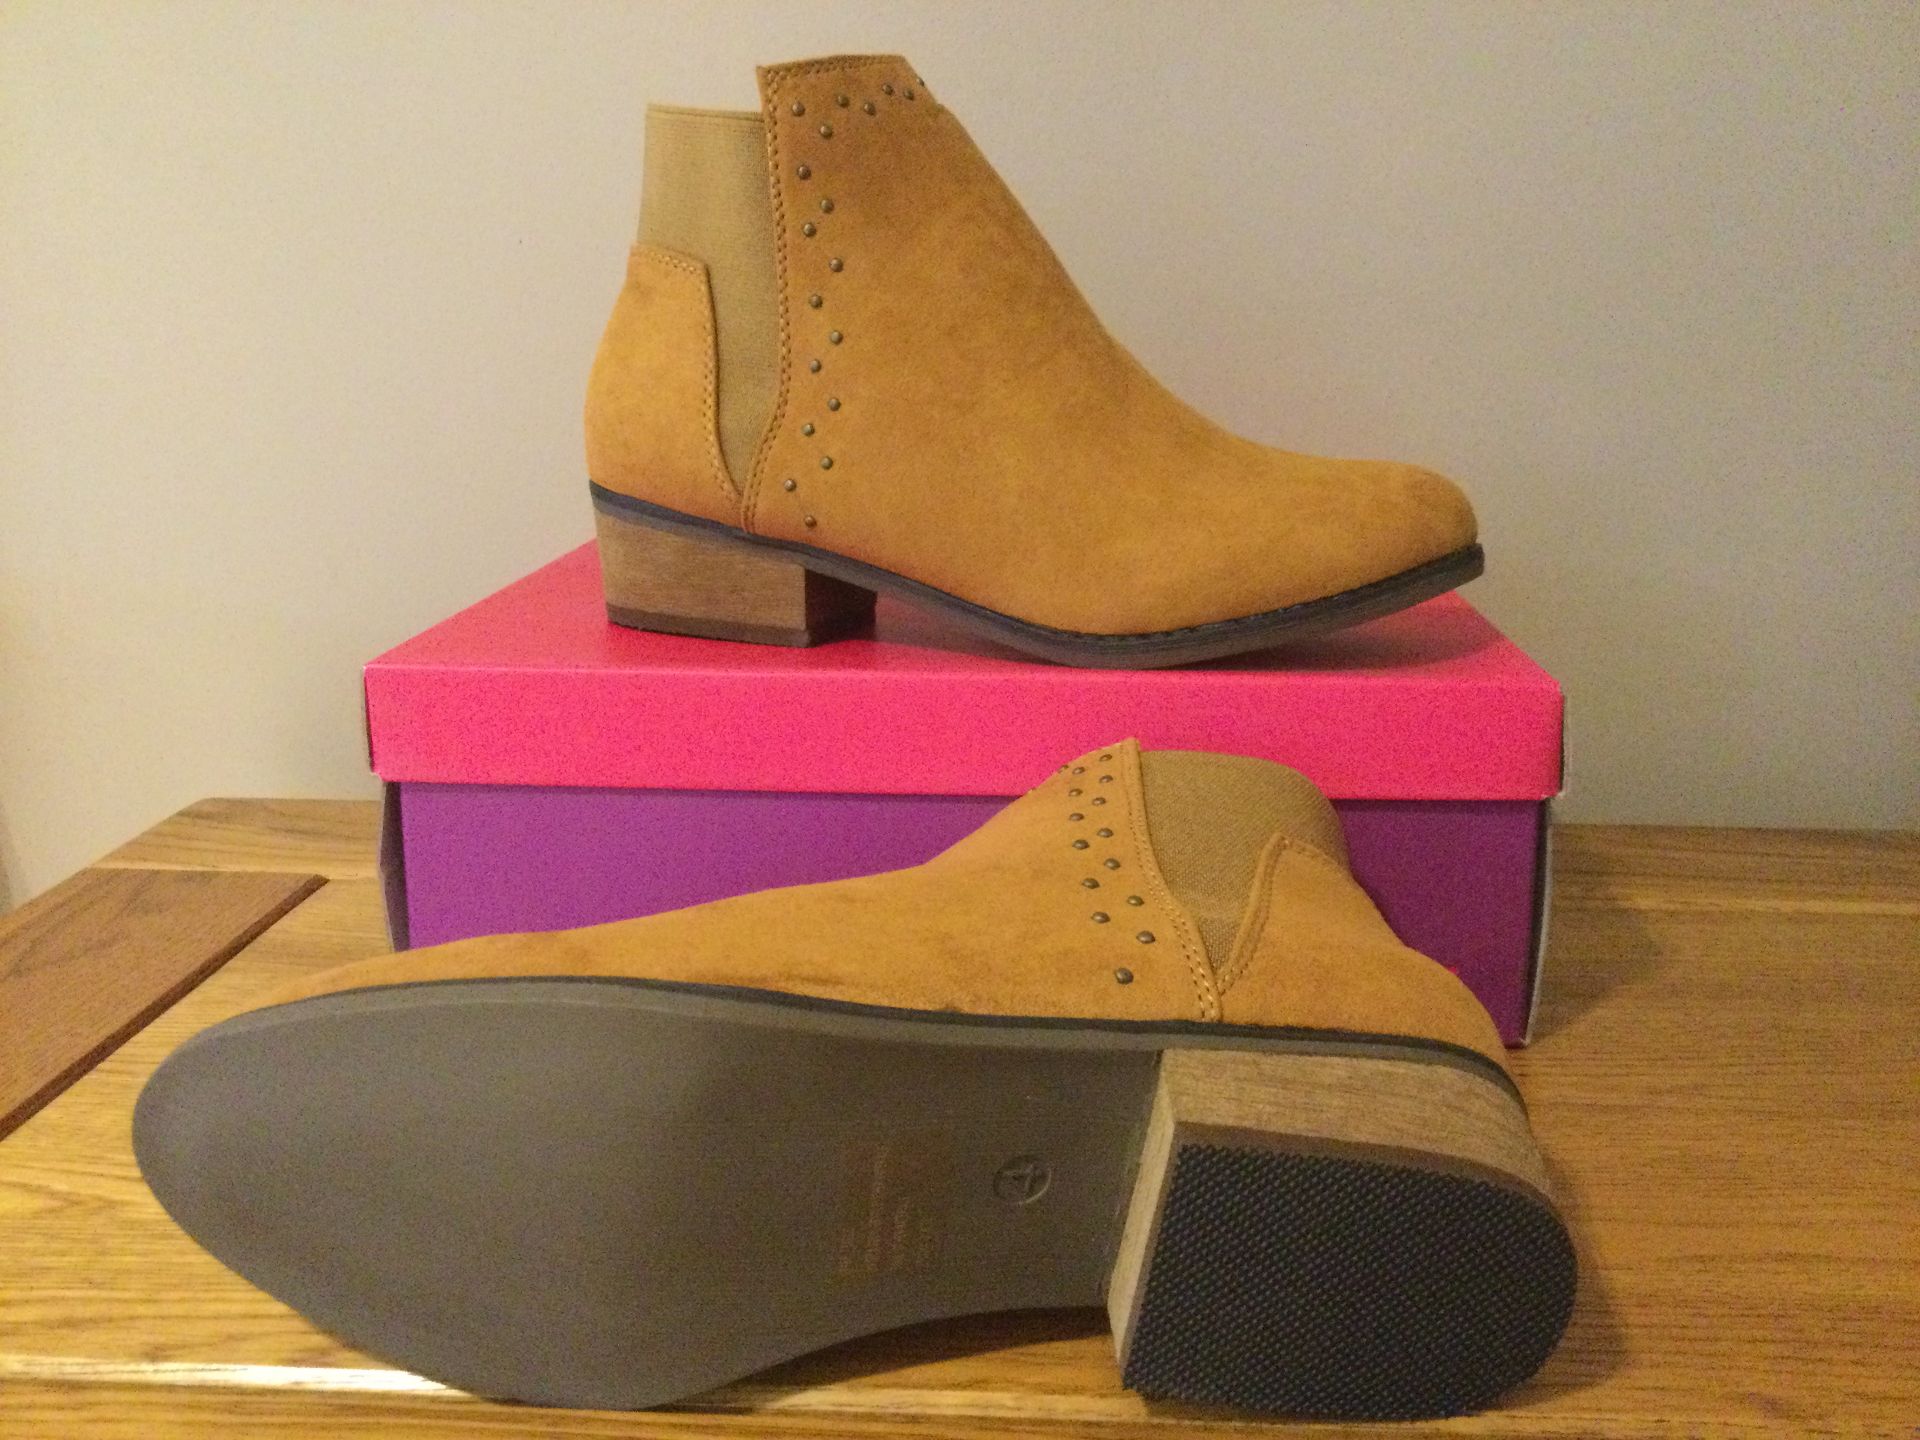 Dolcis “Wendy” Ankle Boots, Size 4, Tan - New RRP £45.00 - Image 4 of 6